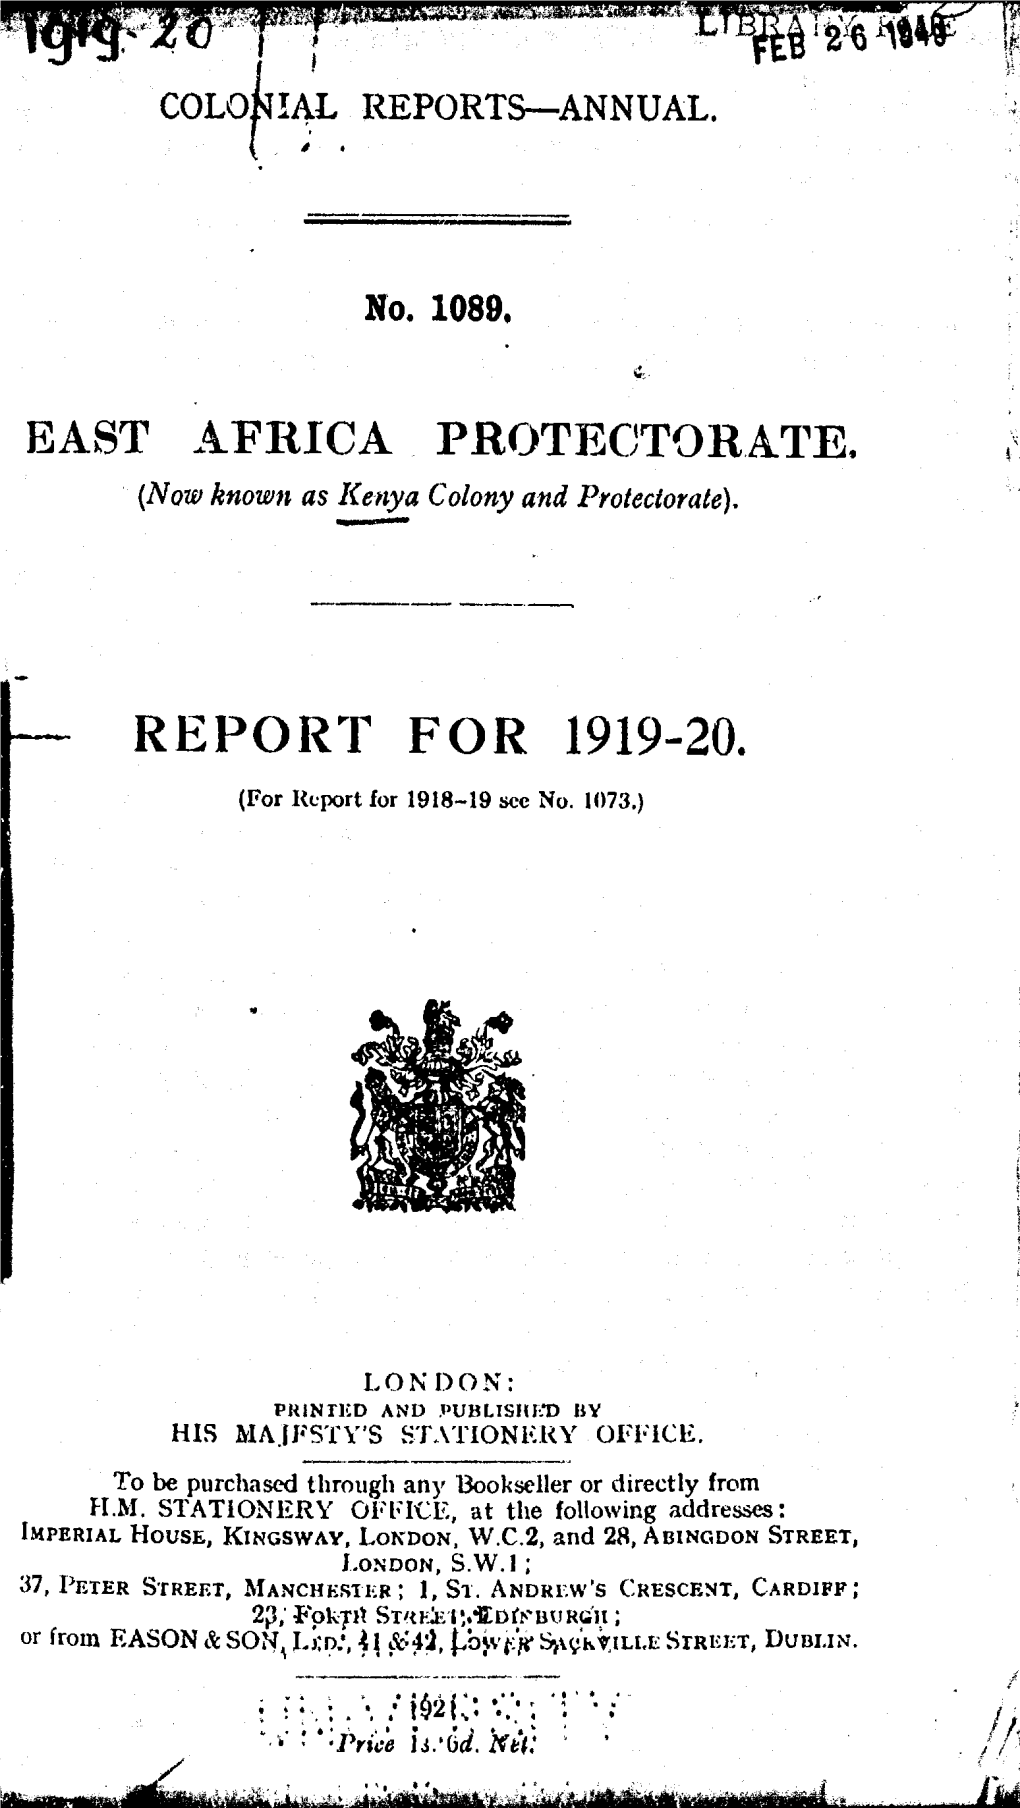 Annual Report of the Colonies, East Africa Protectorate, Kenya, 1919-20